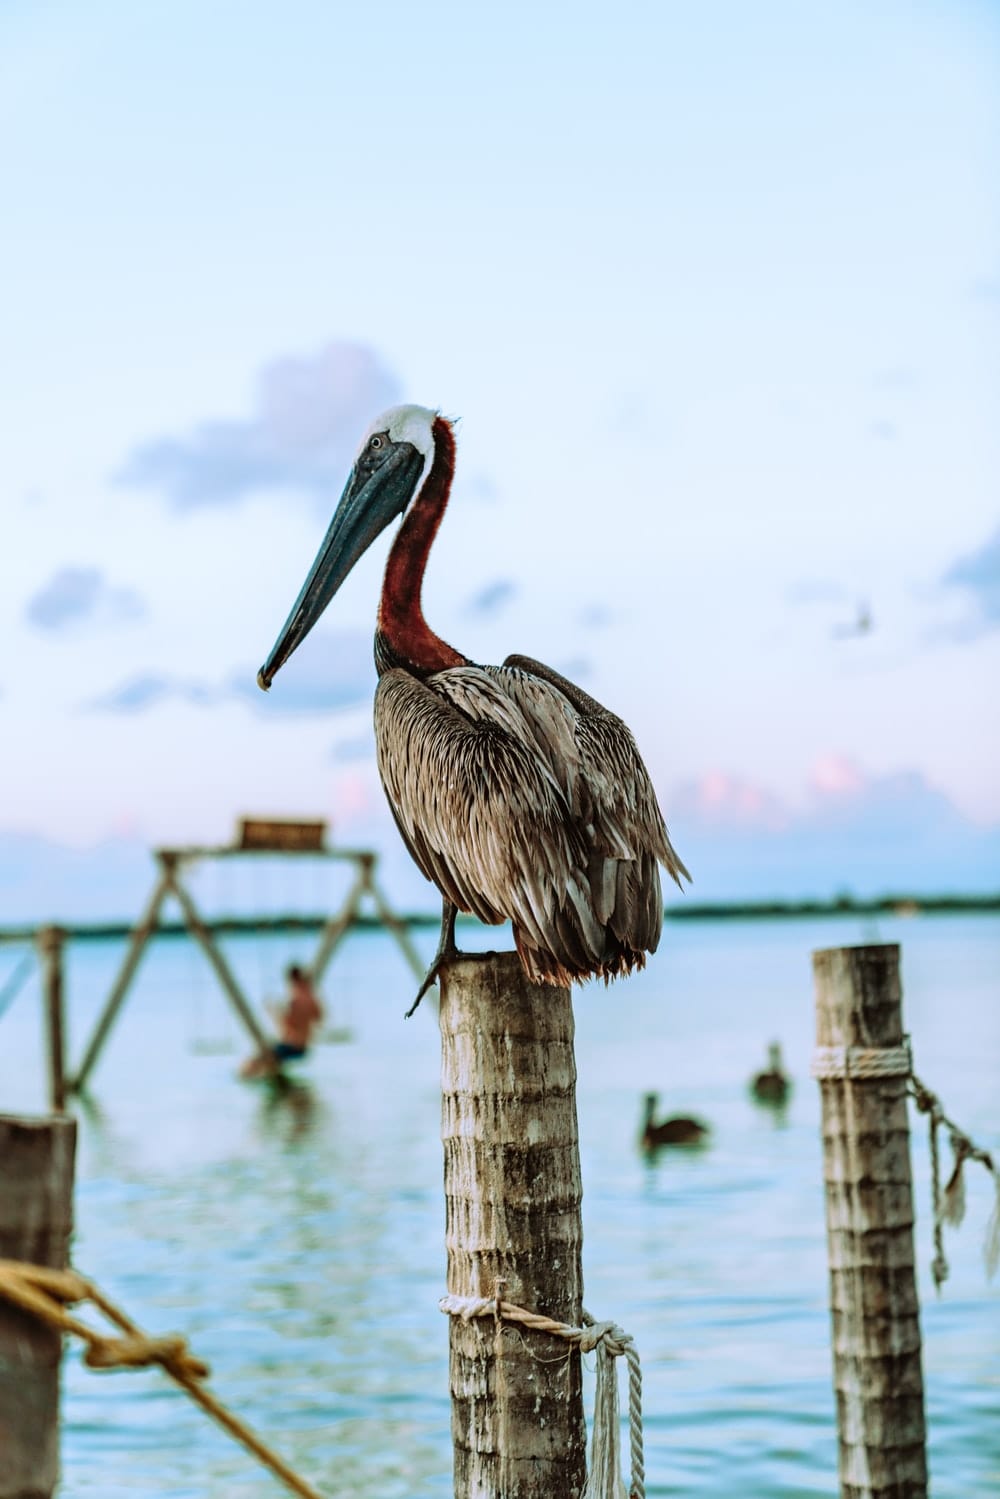 Cross Stitch | Pelican - Brown Pelican On Brown Wooden Post During Daytime - Cross Stitched